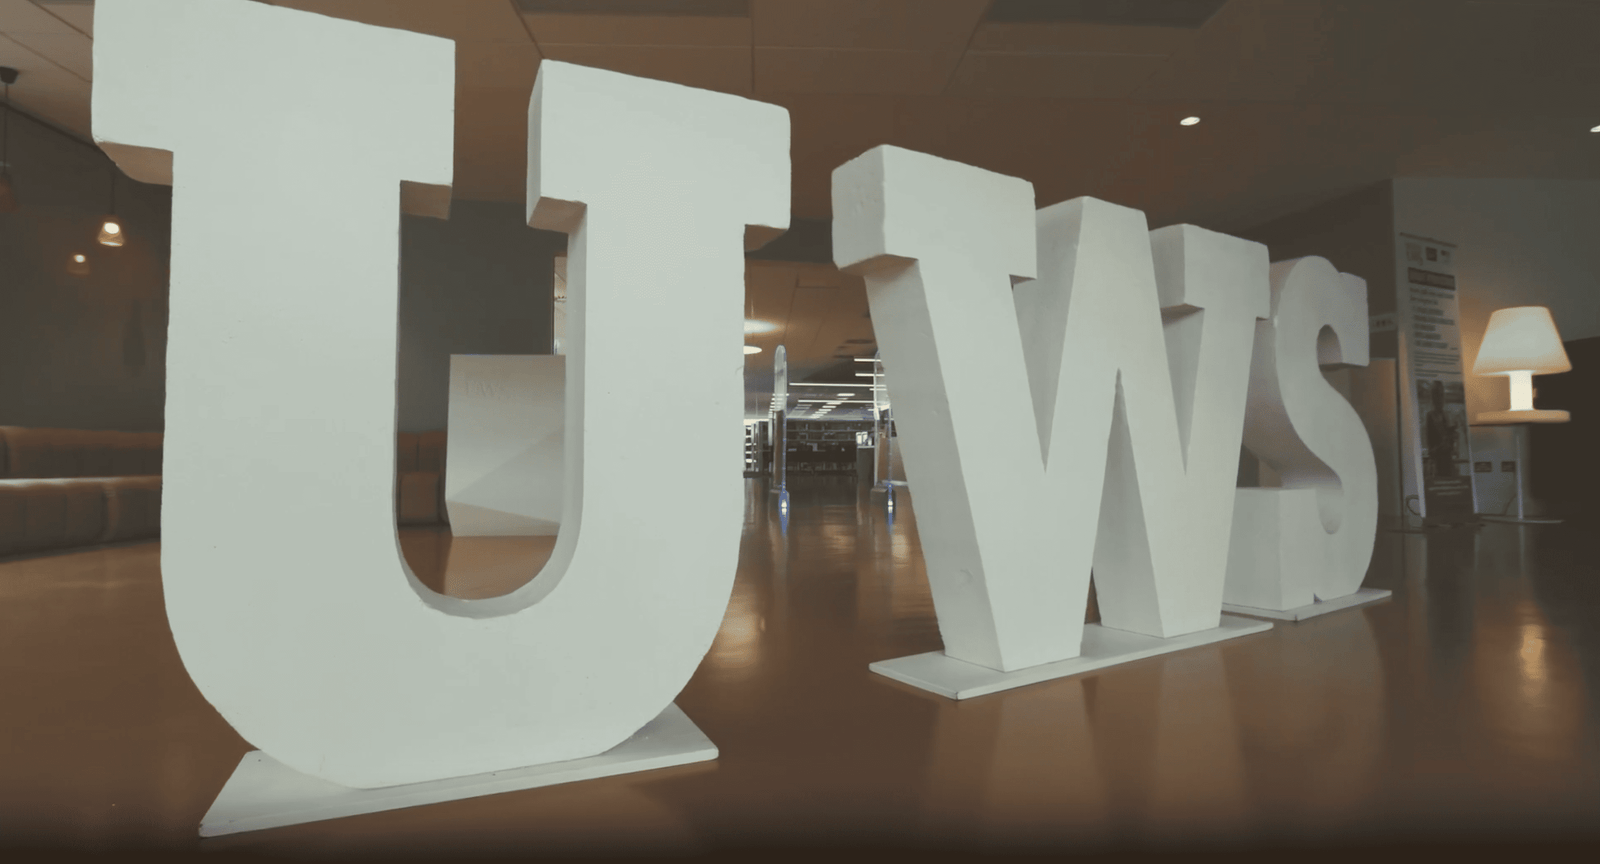 A large white sign with the word uws on it, representing the legacy and global recognition of the University of the West of Scotland.